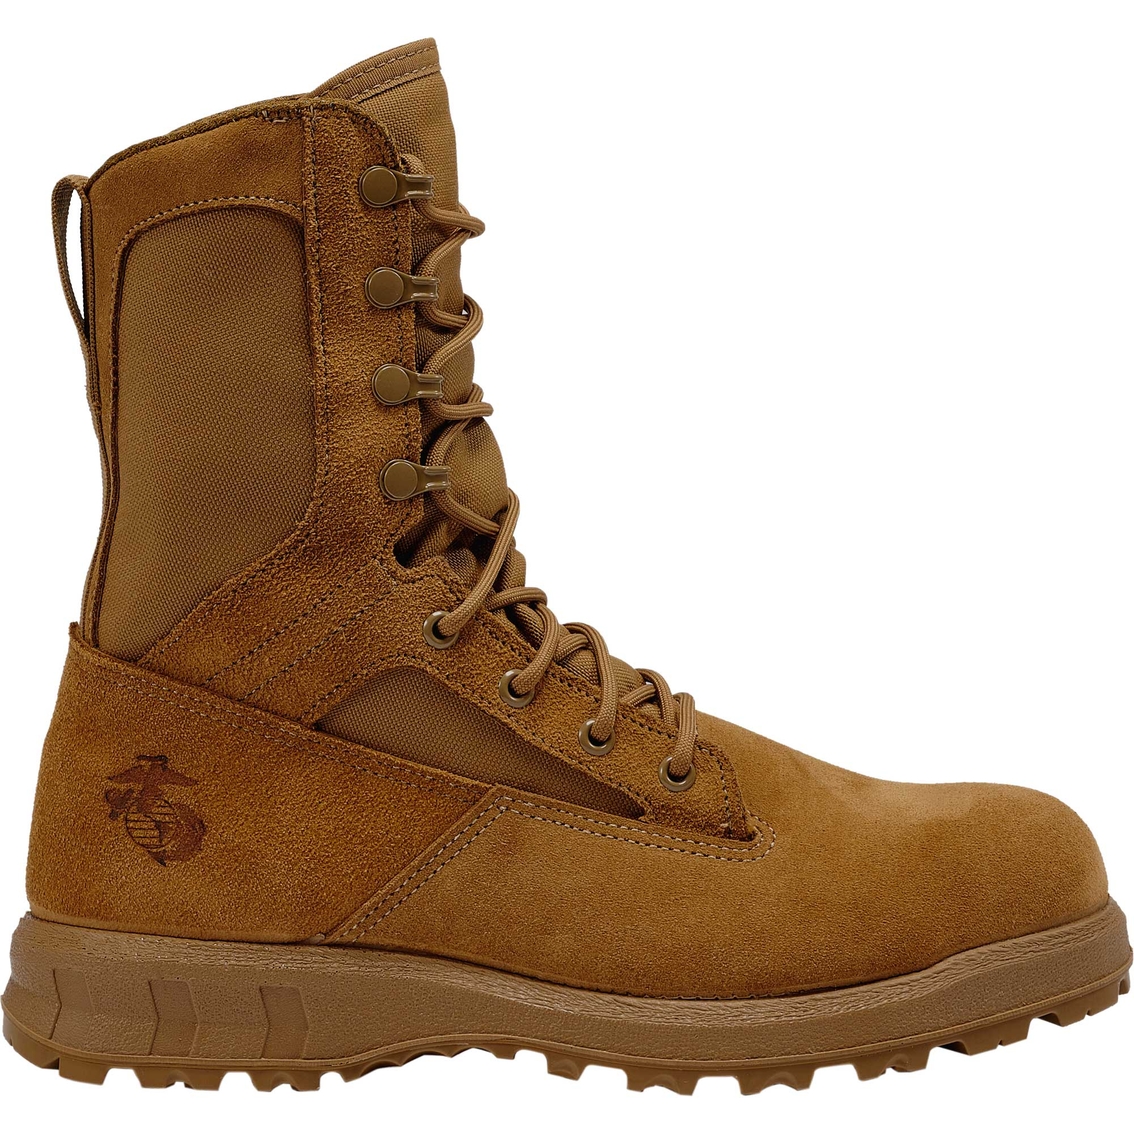 Belleville Ultralight Marine Corps Certified Hot Weather Boots - Image 2 of 7